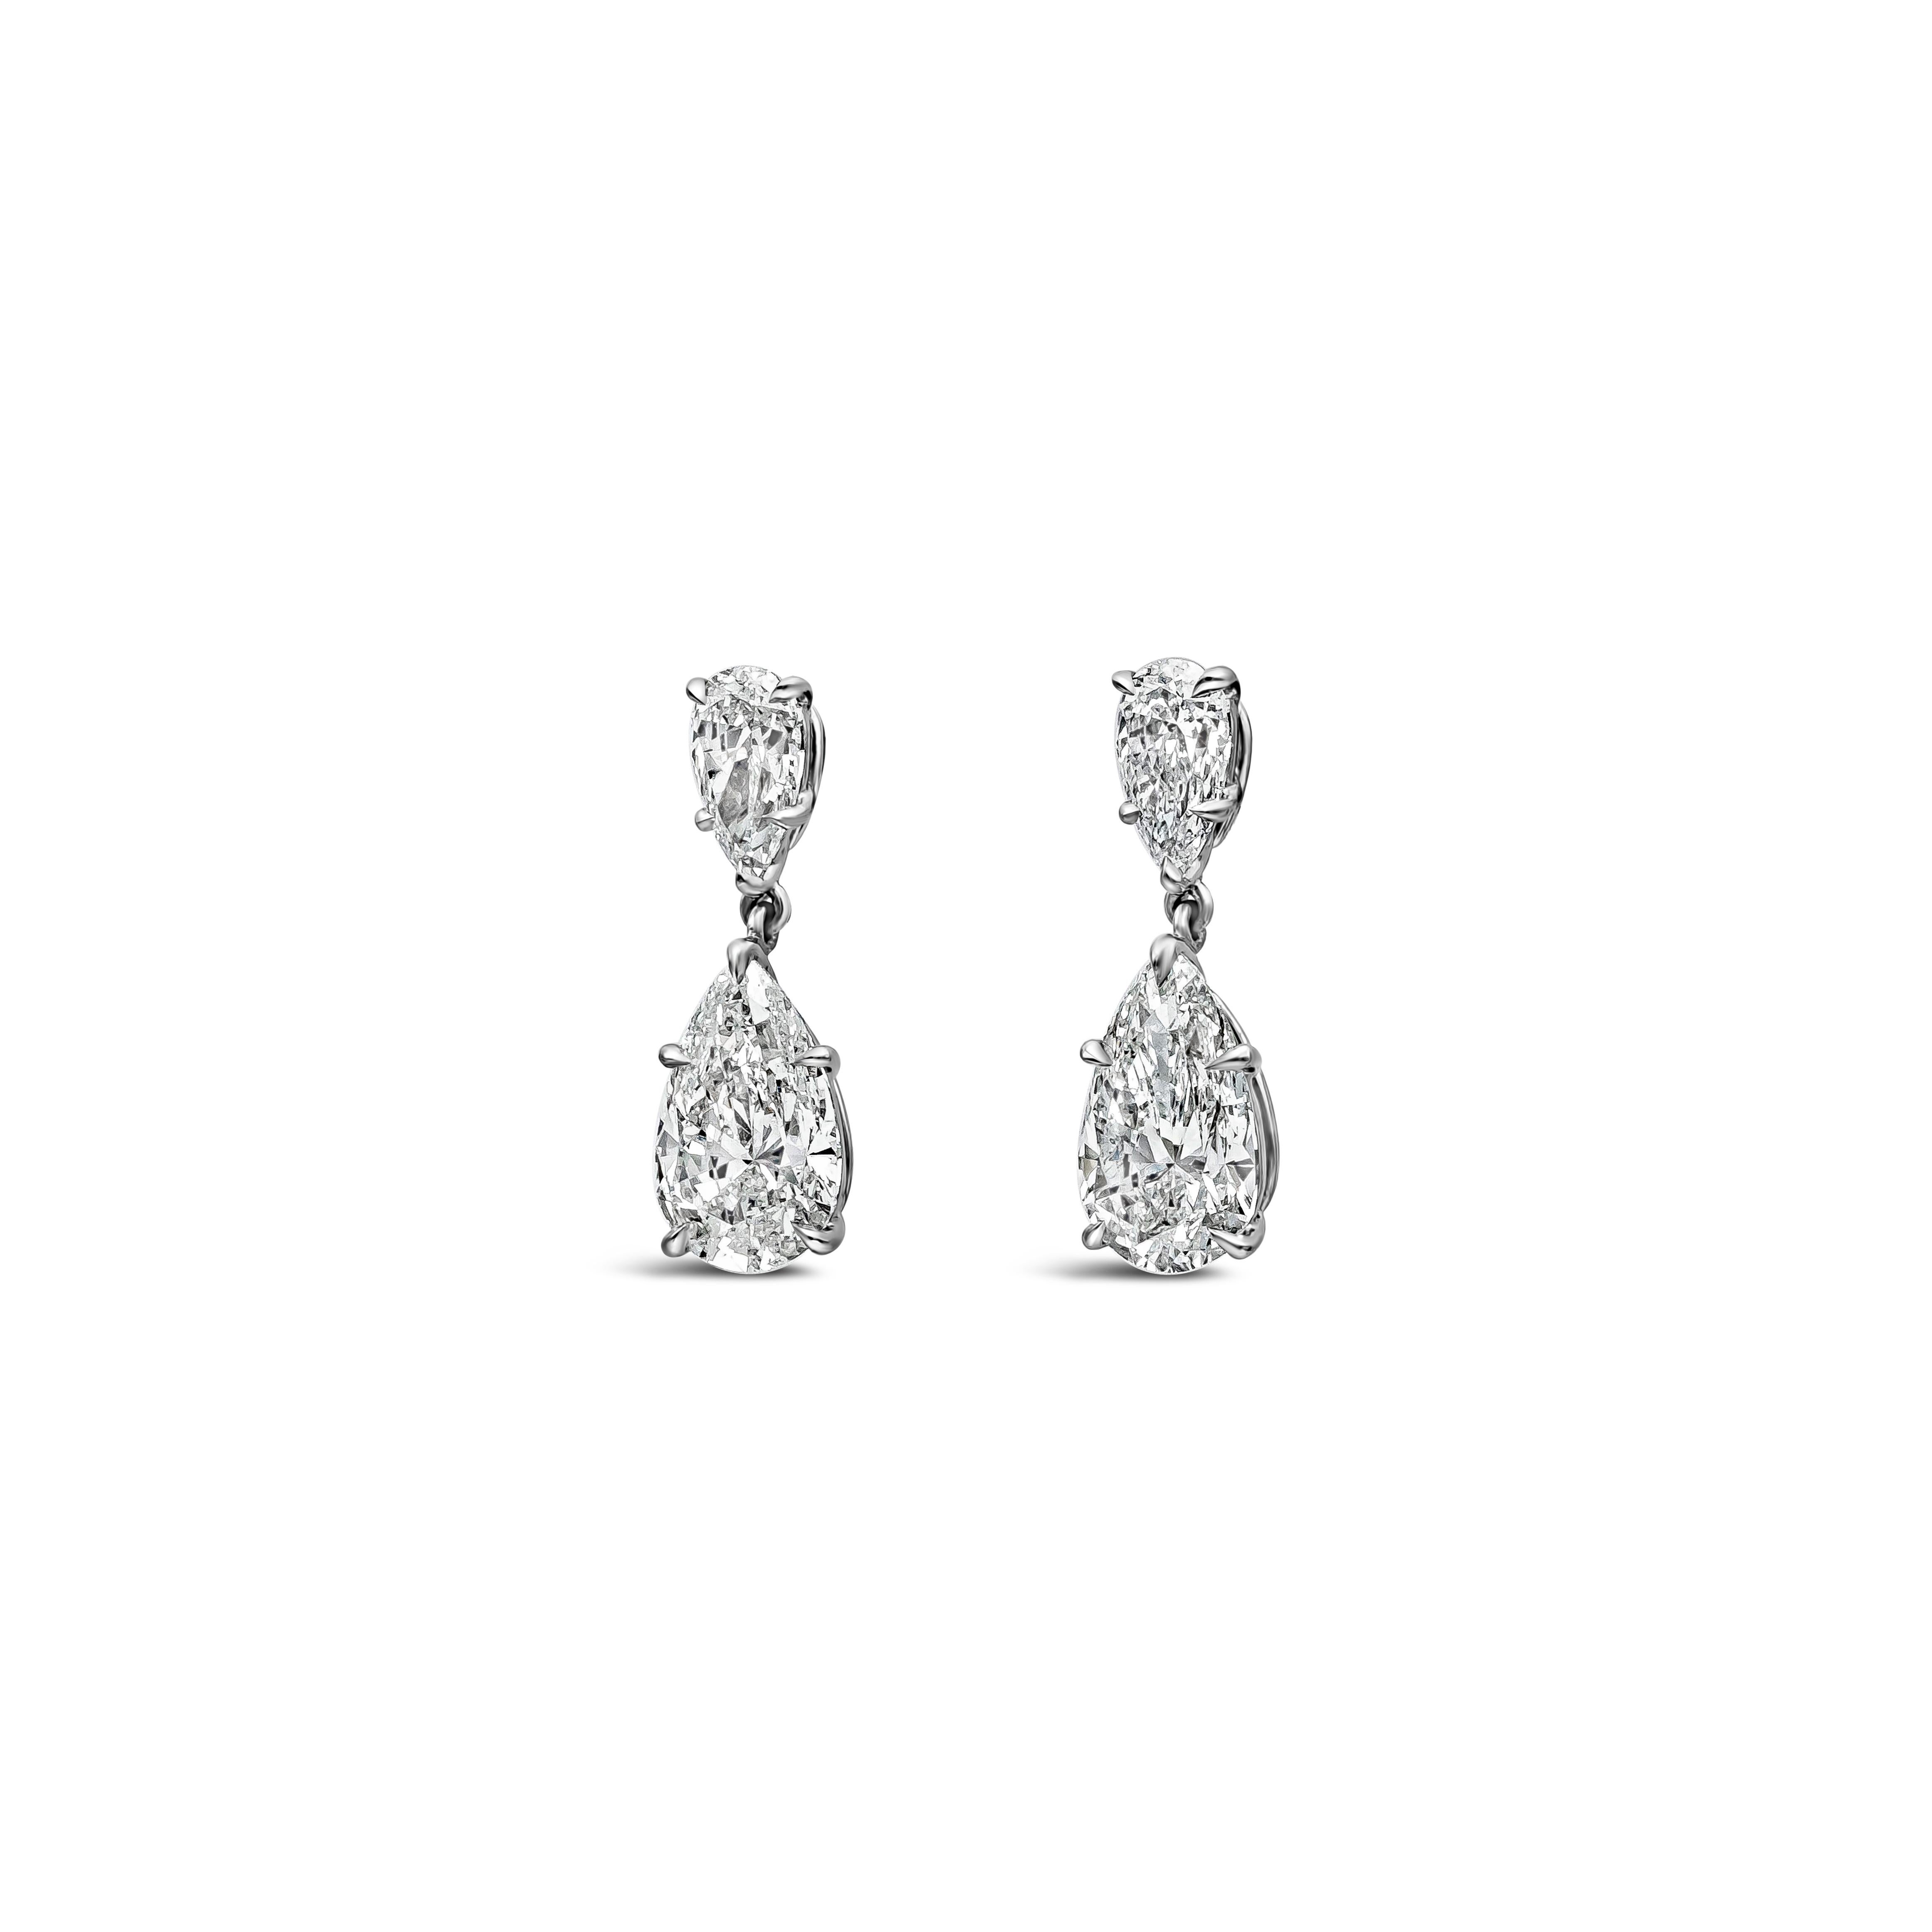 A classy pair of dangle earrings featuring two GIA Certified pear shape diamond weighing 3.20 carats total, F-G Color and SI2 in Clarity. Suspended on another pear shape diamond weighing 1.01 carats total, E-F Color and VS-SI in Clarity. SI in